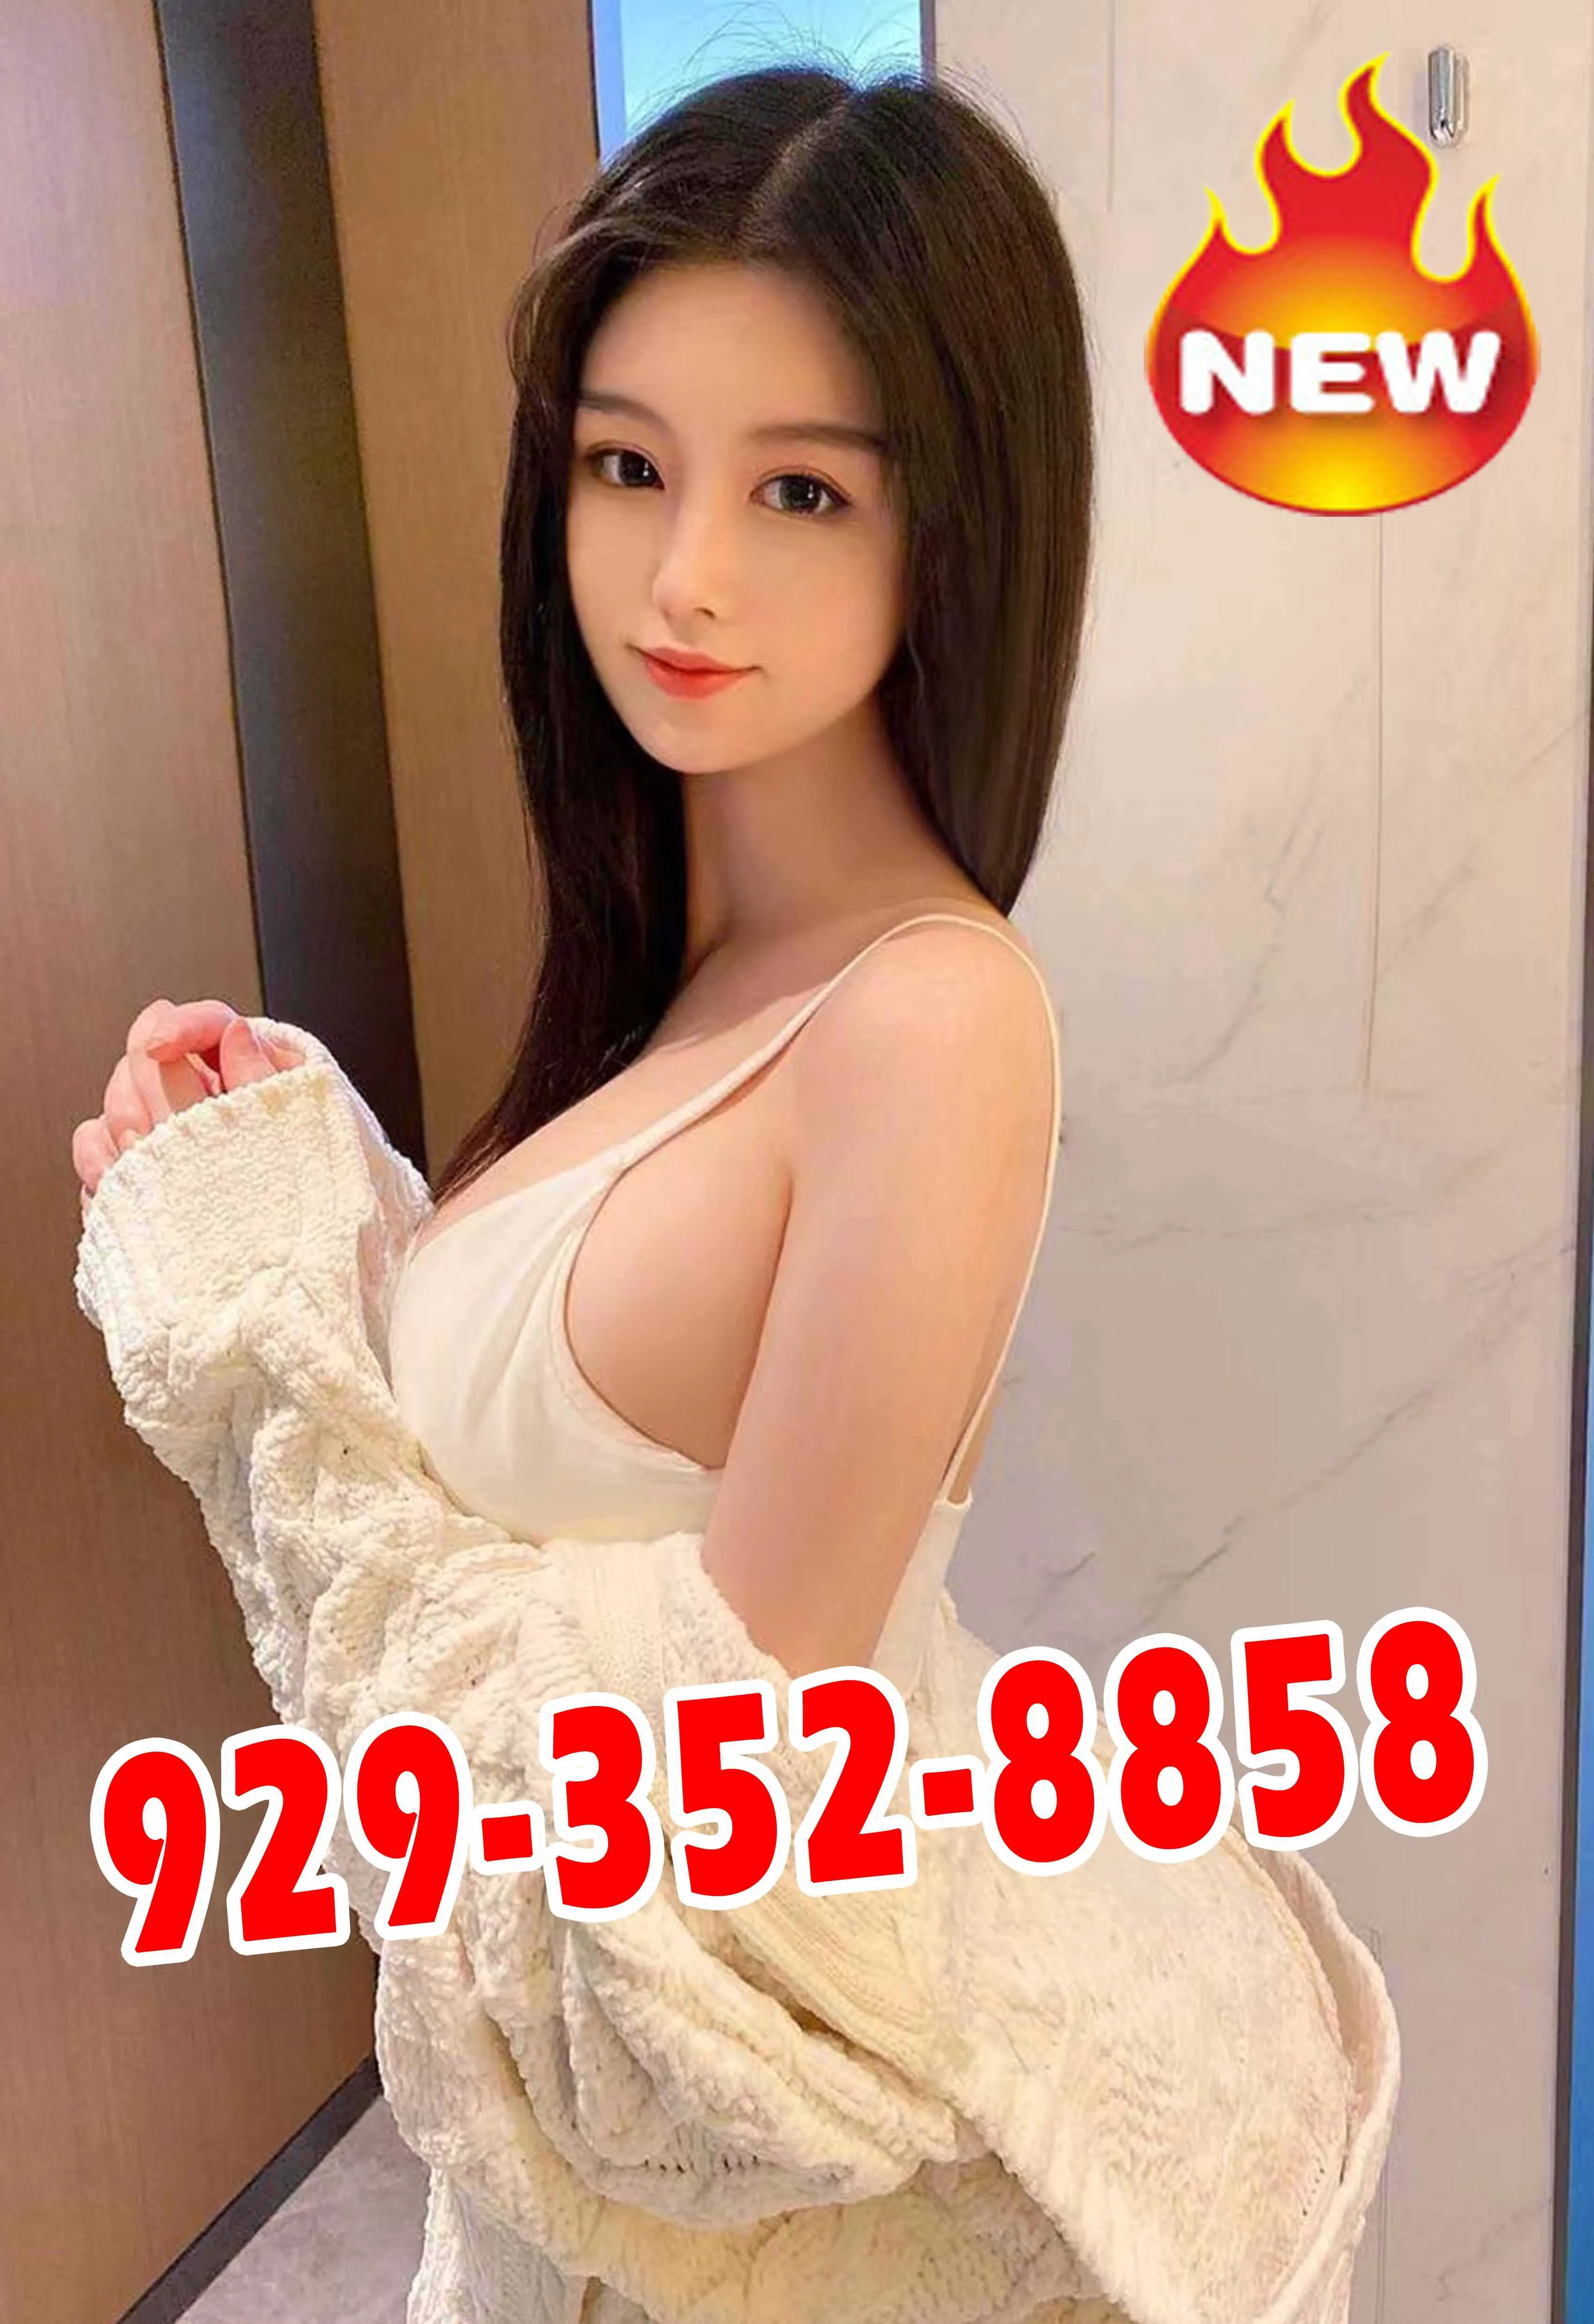 Reviews about escort with phone number 9293528858